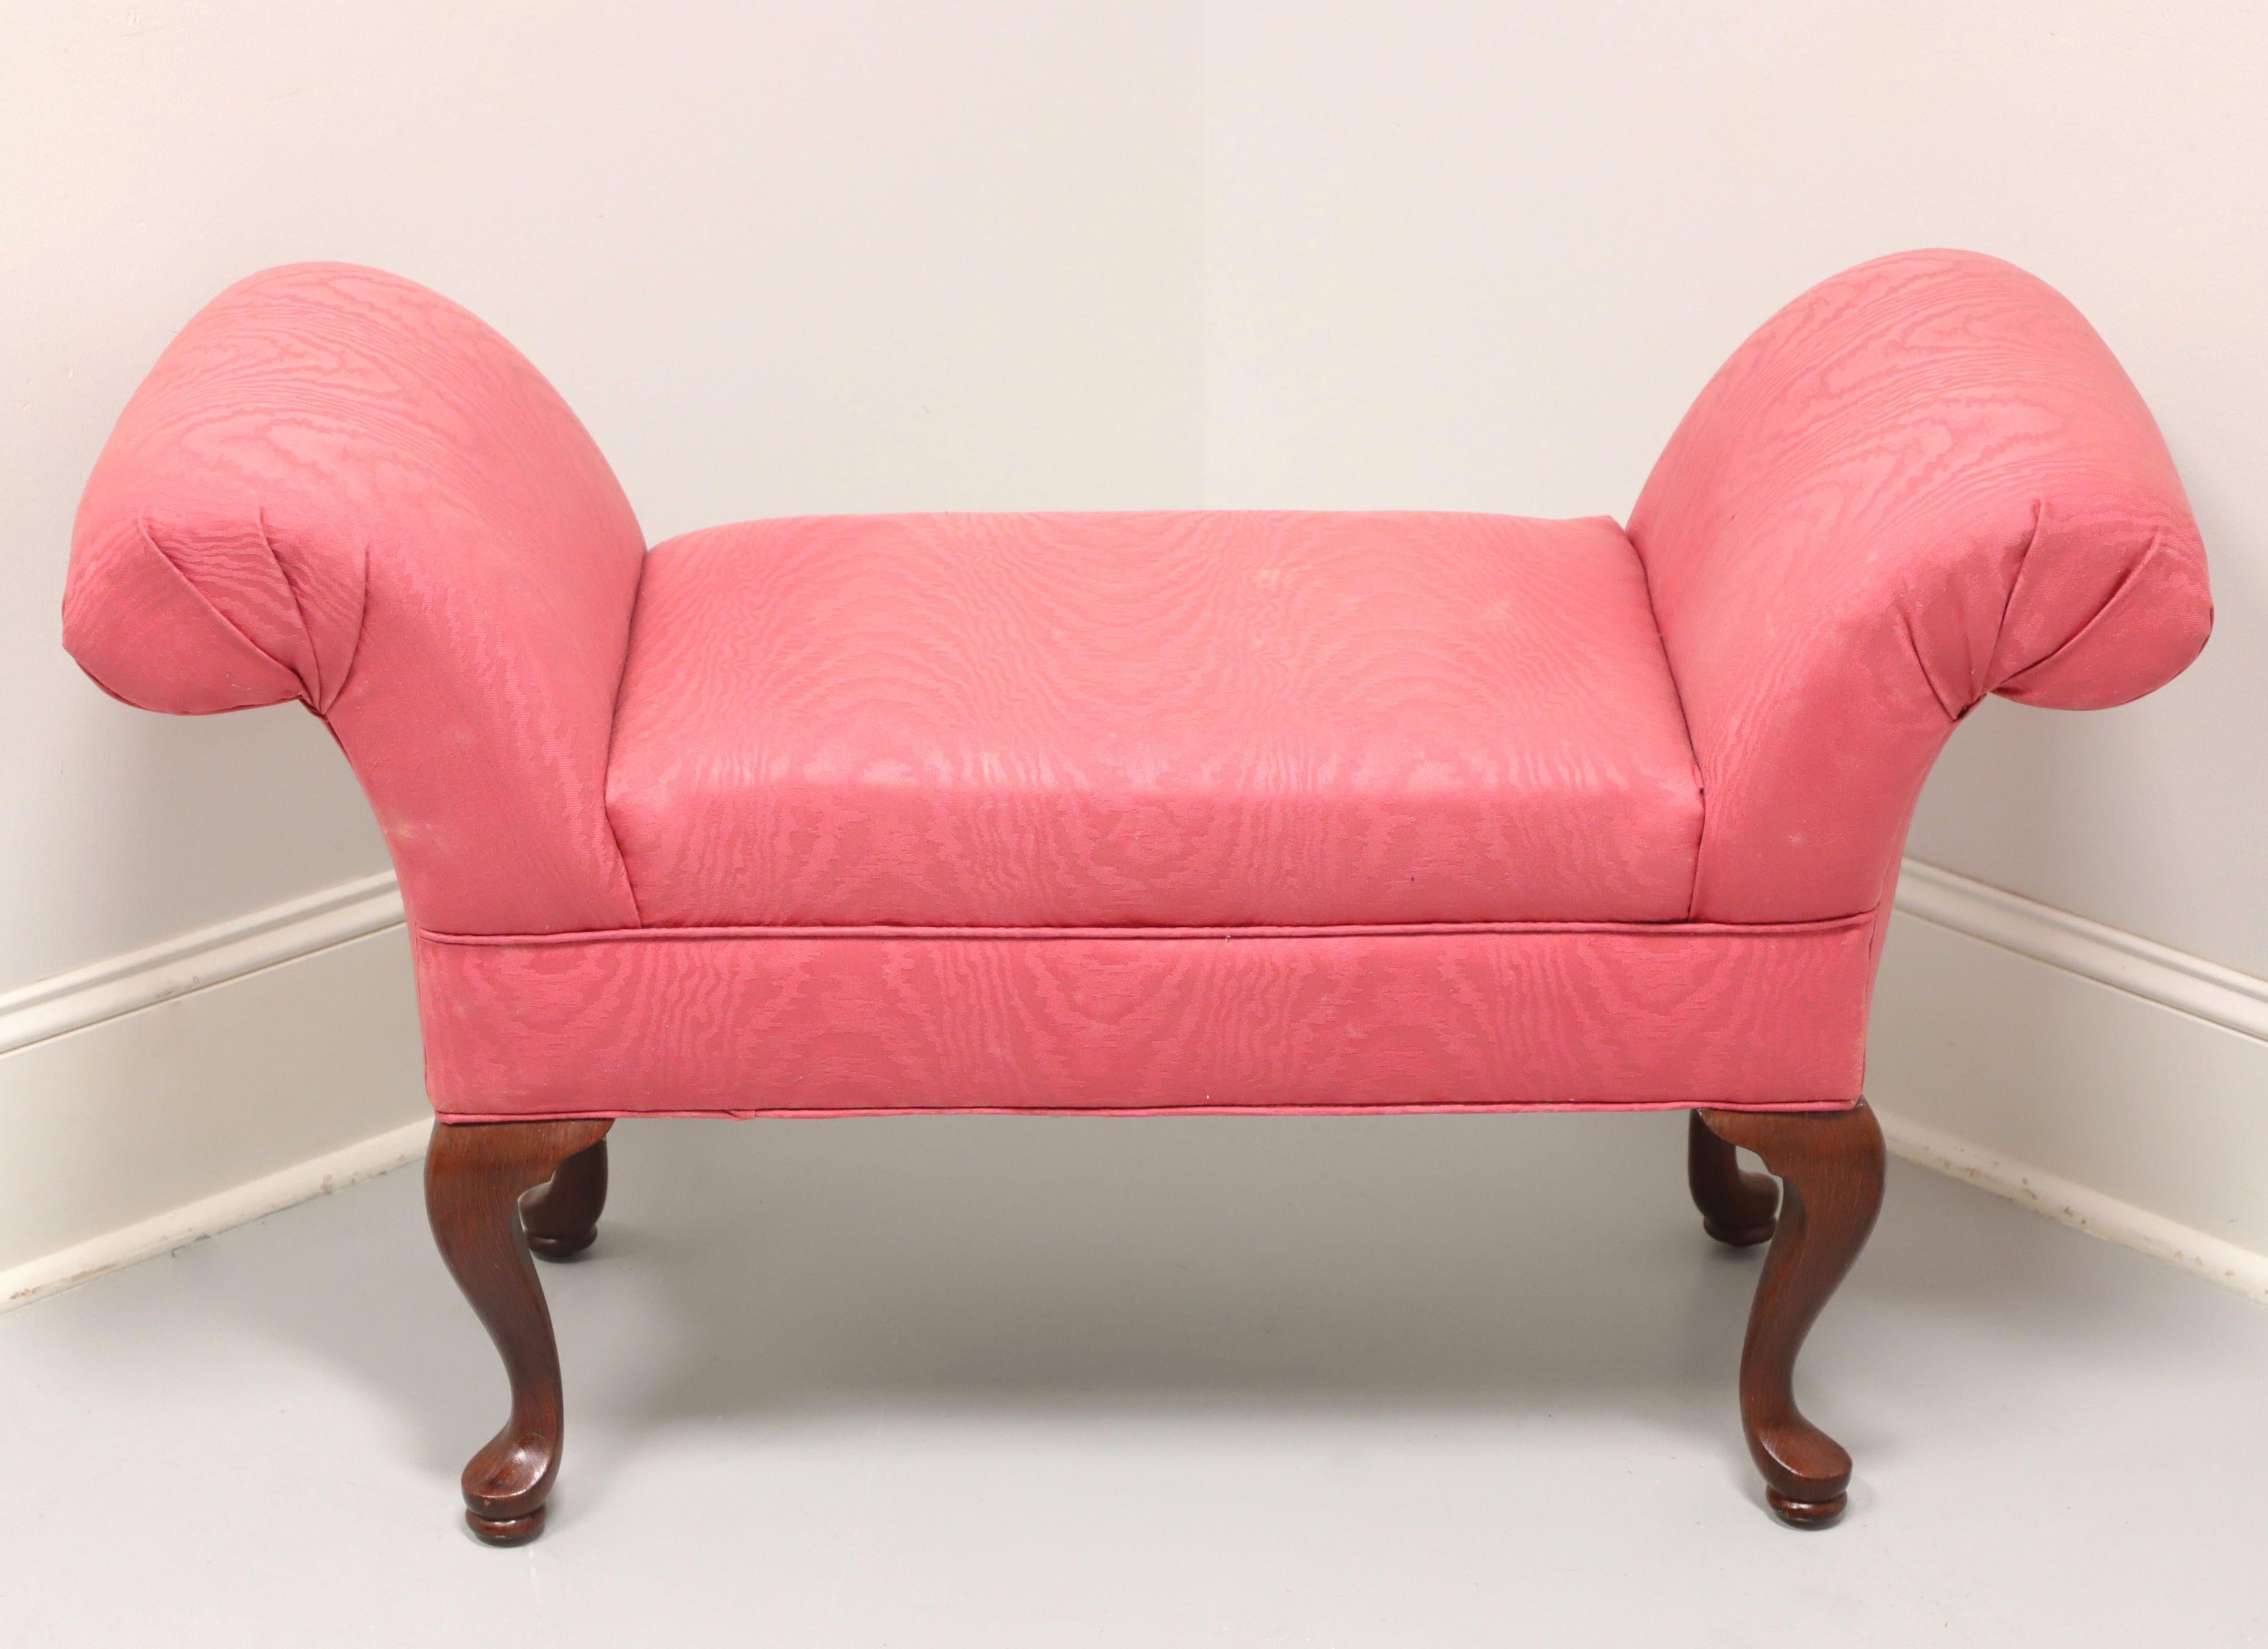 A rolled arm upholstered bench in the Queen Anne style, unbranded. Mahogany frame, rolled arms, pink color flame fabric upholstery, cabriole legs and pad feet. Made in the USA, in the late 20th Century.

Measures: Overall: 42.5w 18d 24.25h, Seat: